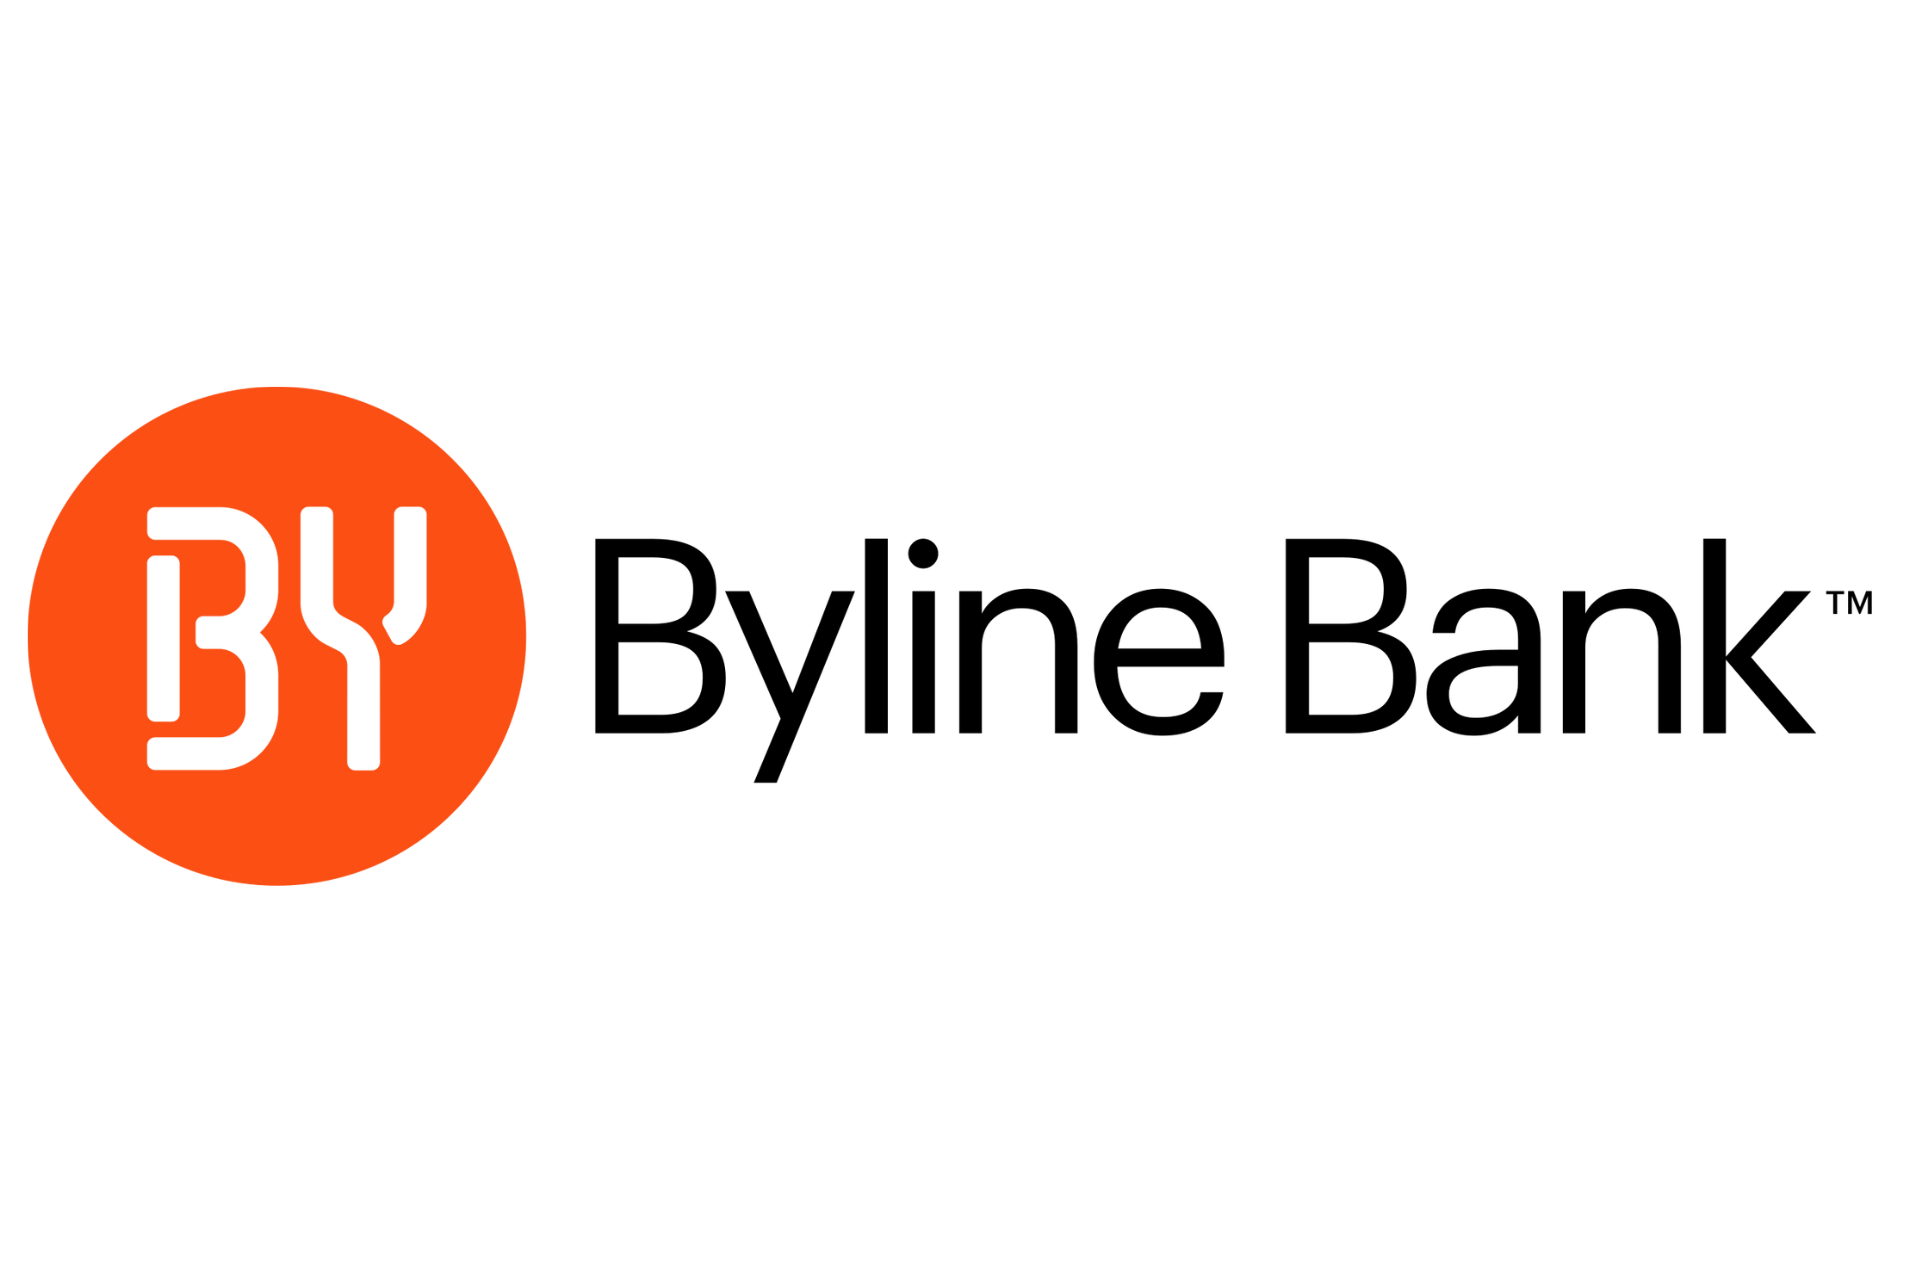 The byline bank logo is orange and black on a white background.